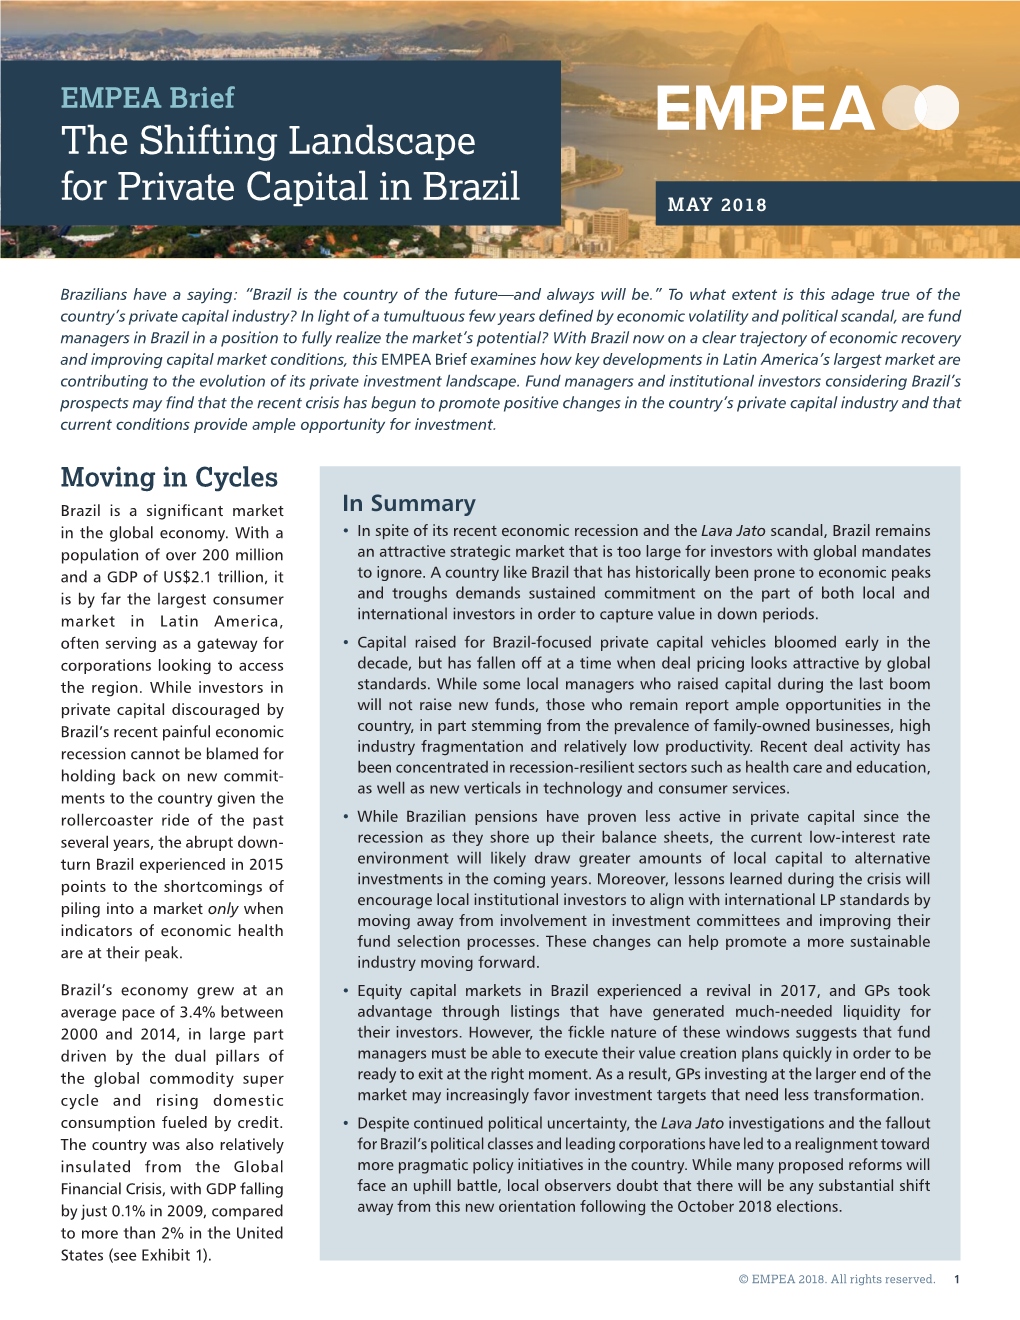 The Shifting Landscape for Private Capital in Brazil MAY 2018